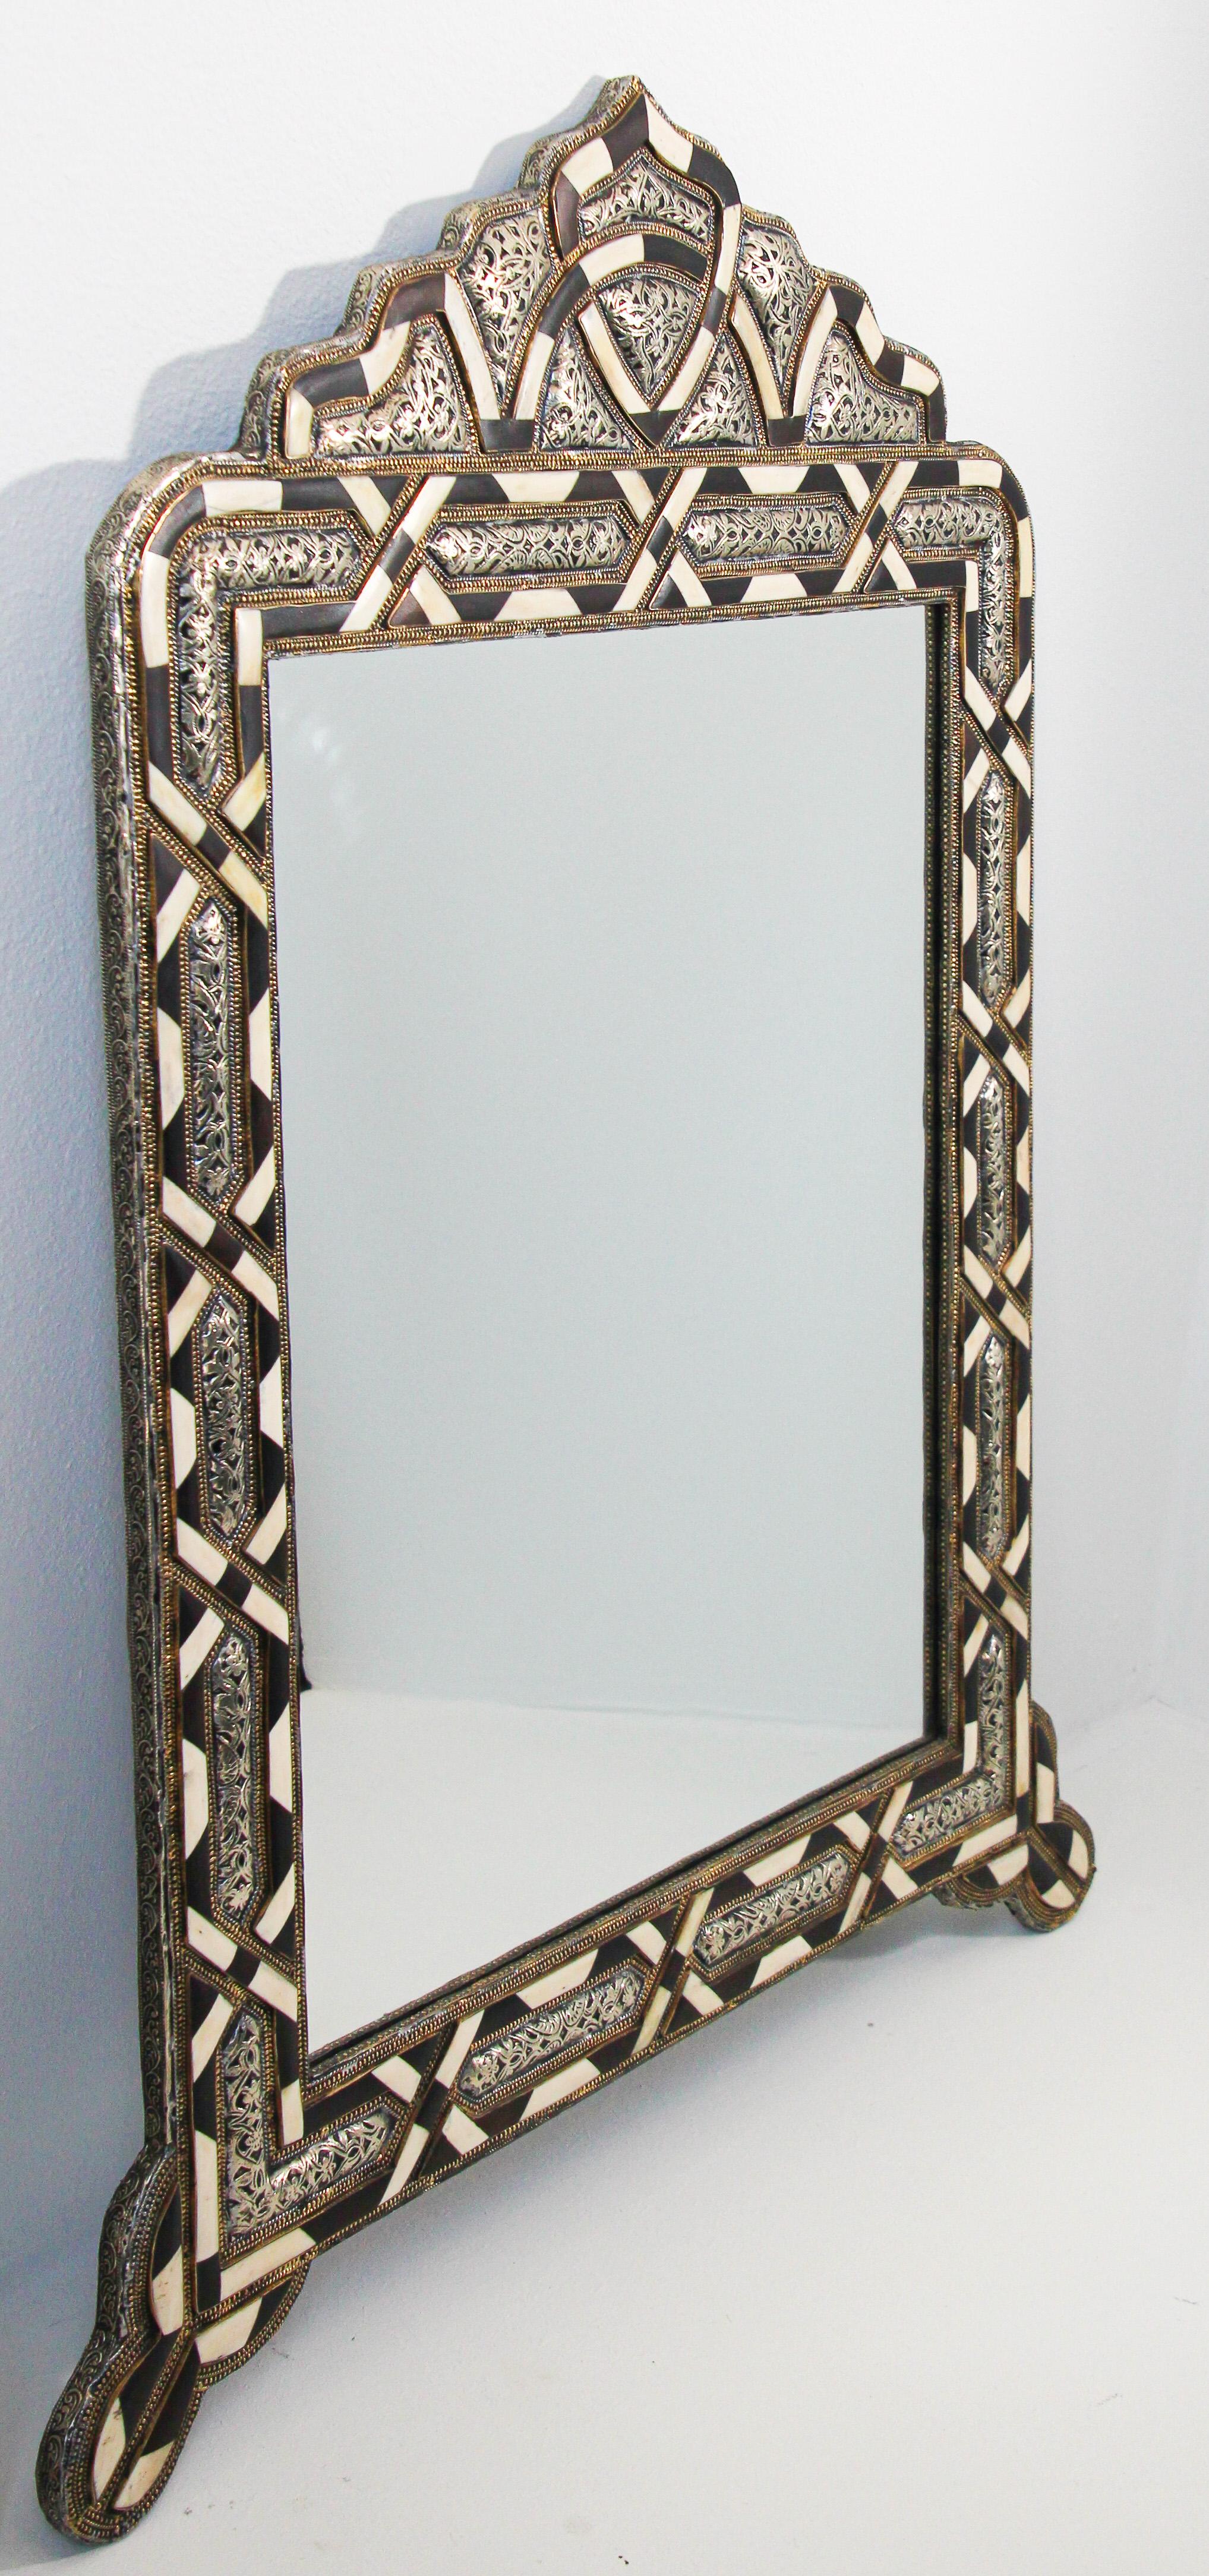 Pair of Handcrafted Bone Inlay Arched Moroccan Mirrors 12